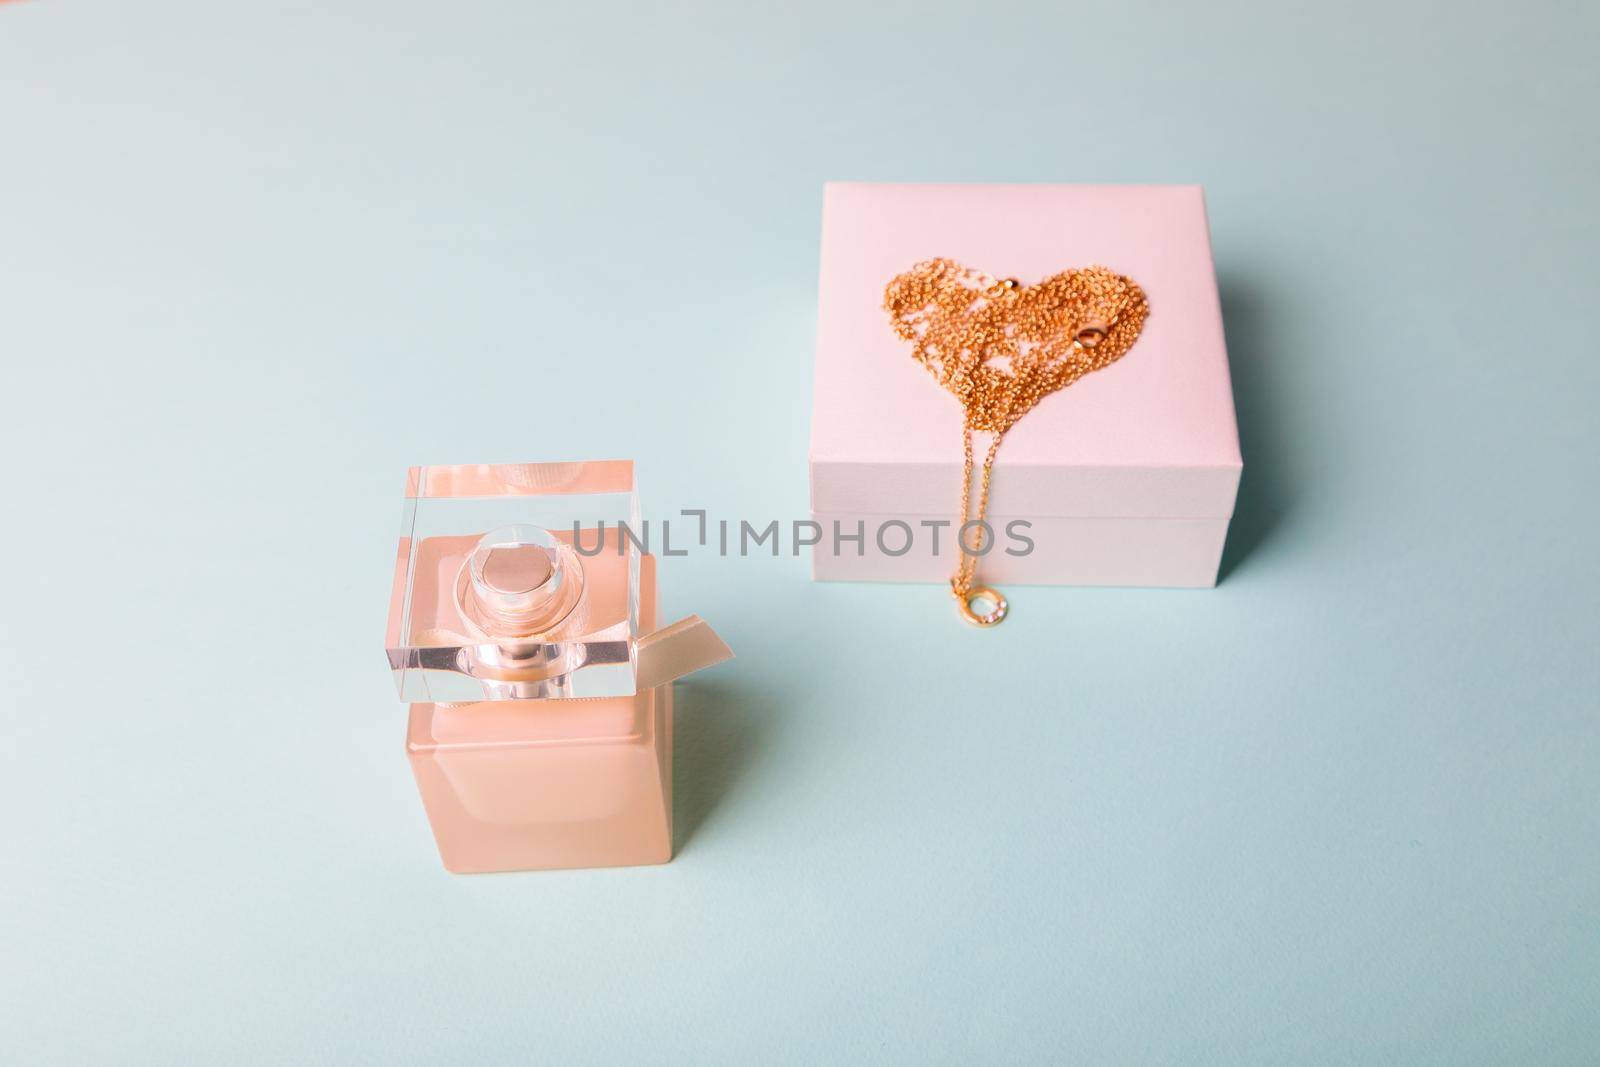 A gift for Valentine's Day. Perfume and a box with a gold chain on a blue background. Chain in the shape of a heart.